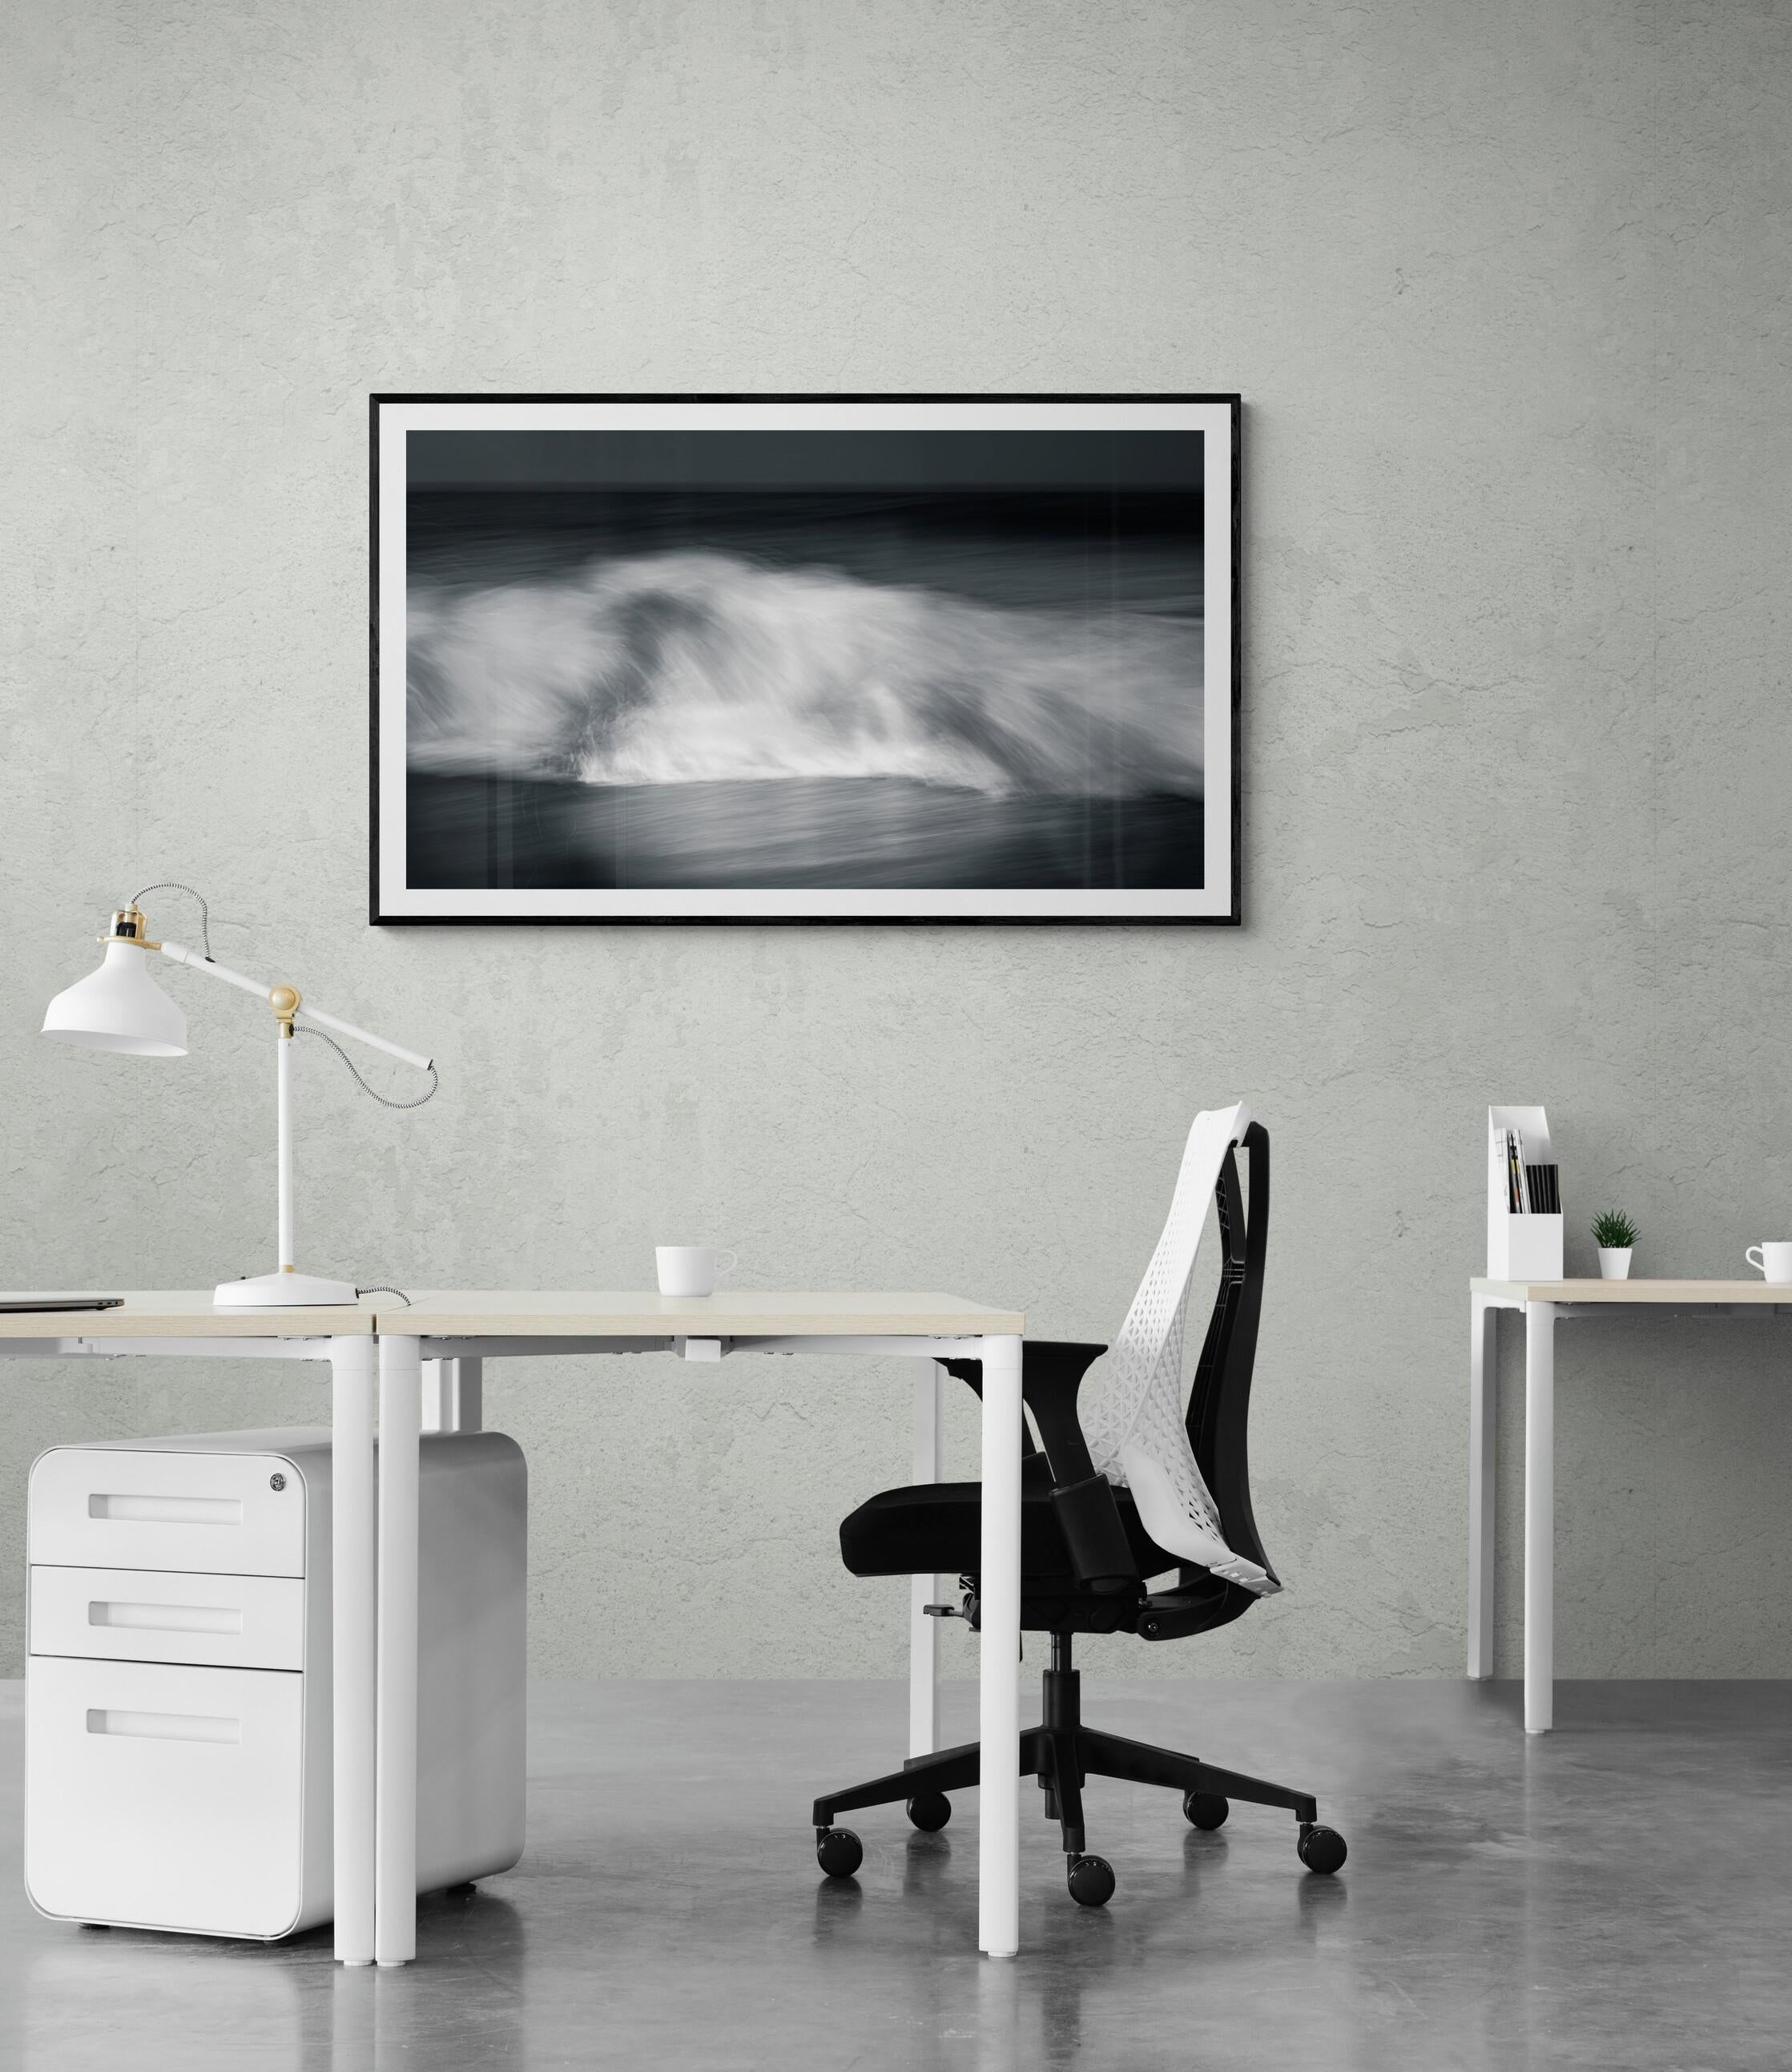 Limited Edition 1 / 7 Black and White Photograph Seascape - Kinetic #37 For Sale 4